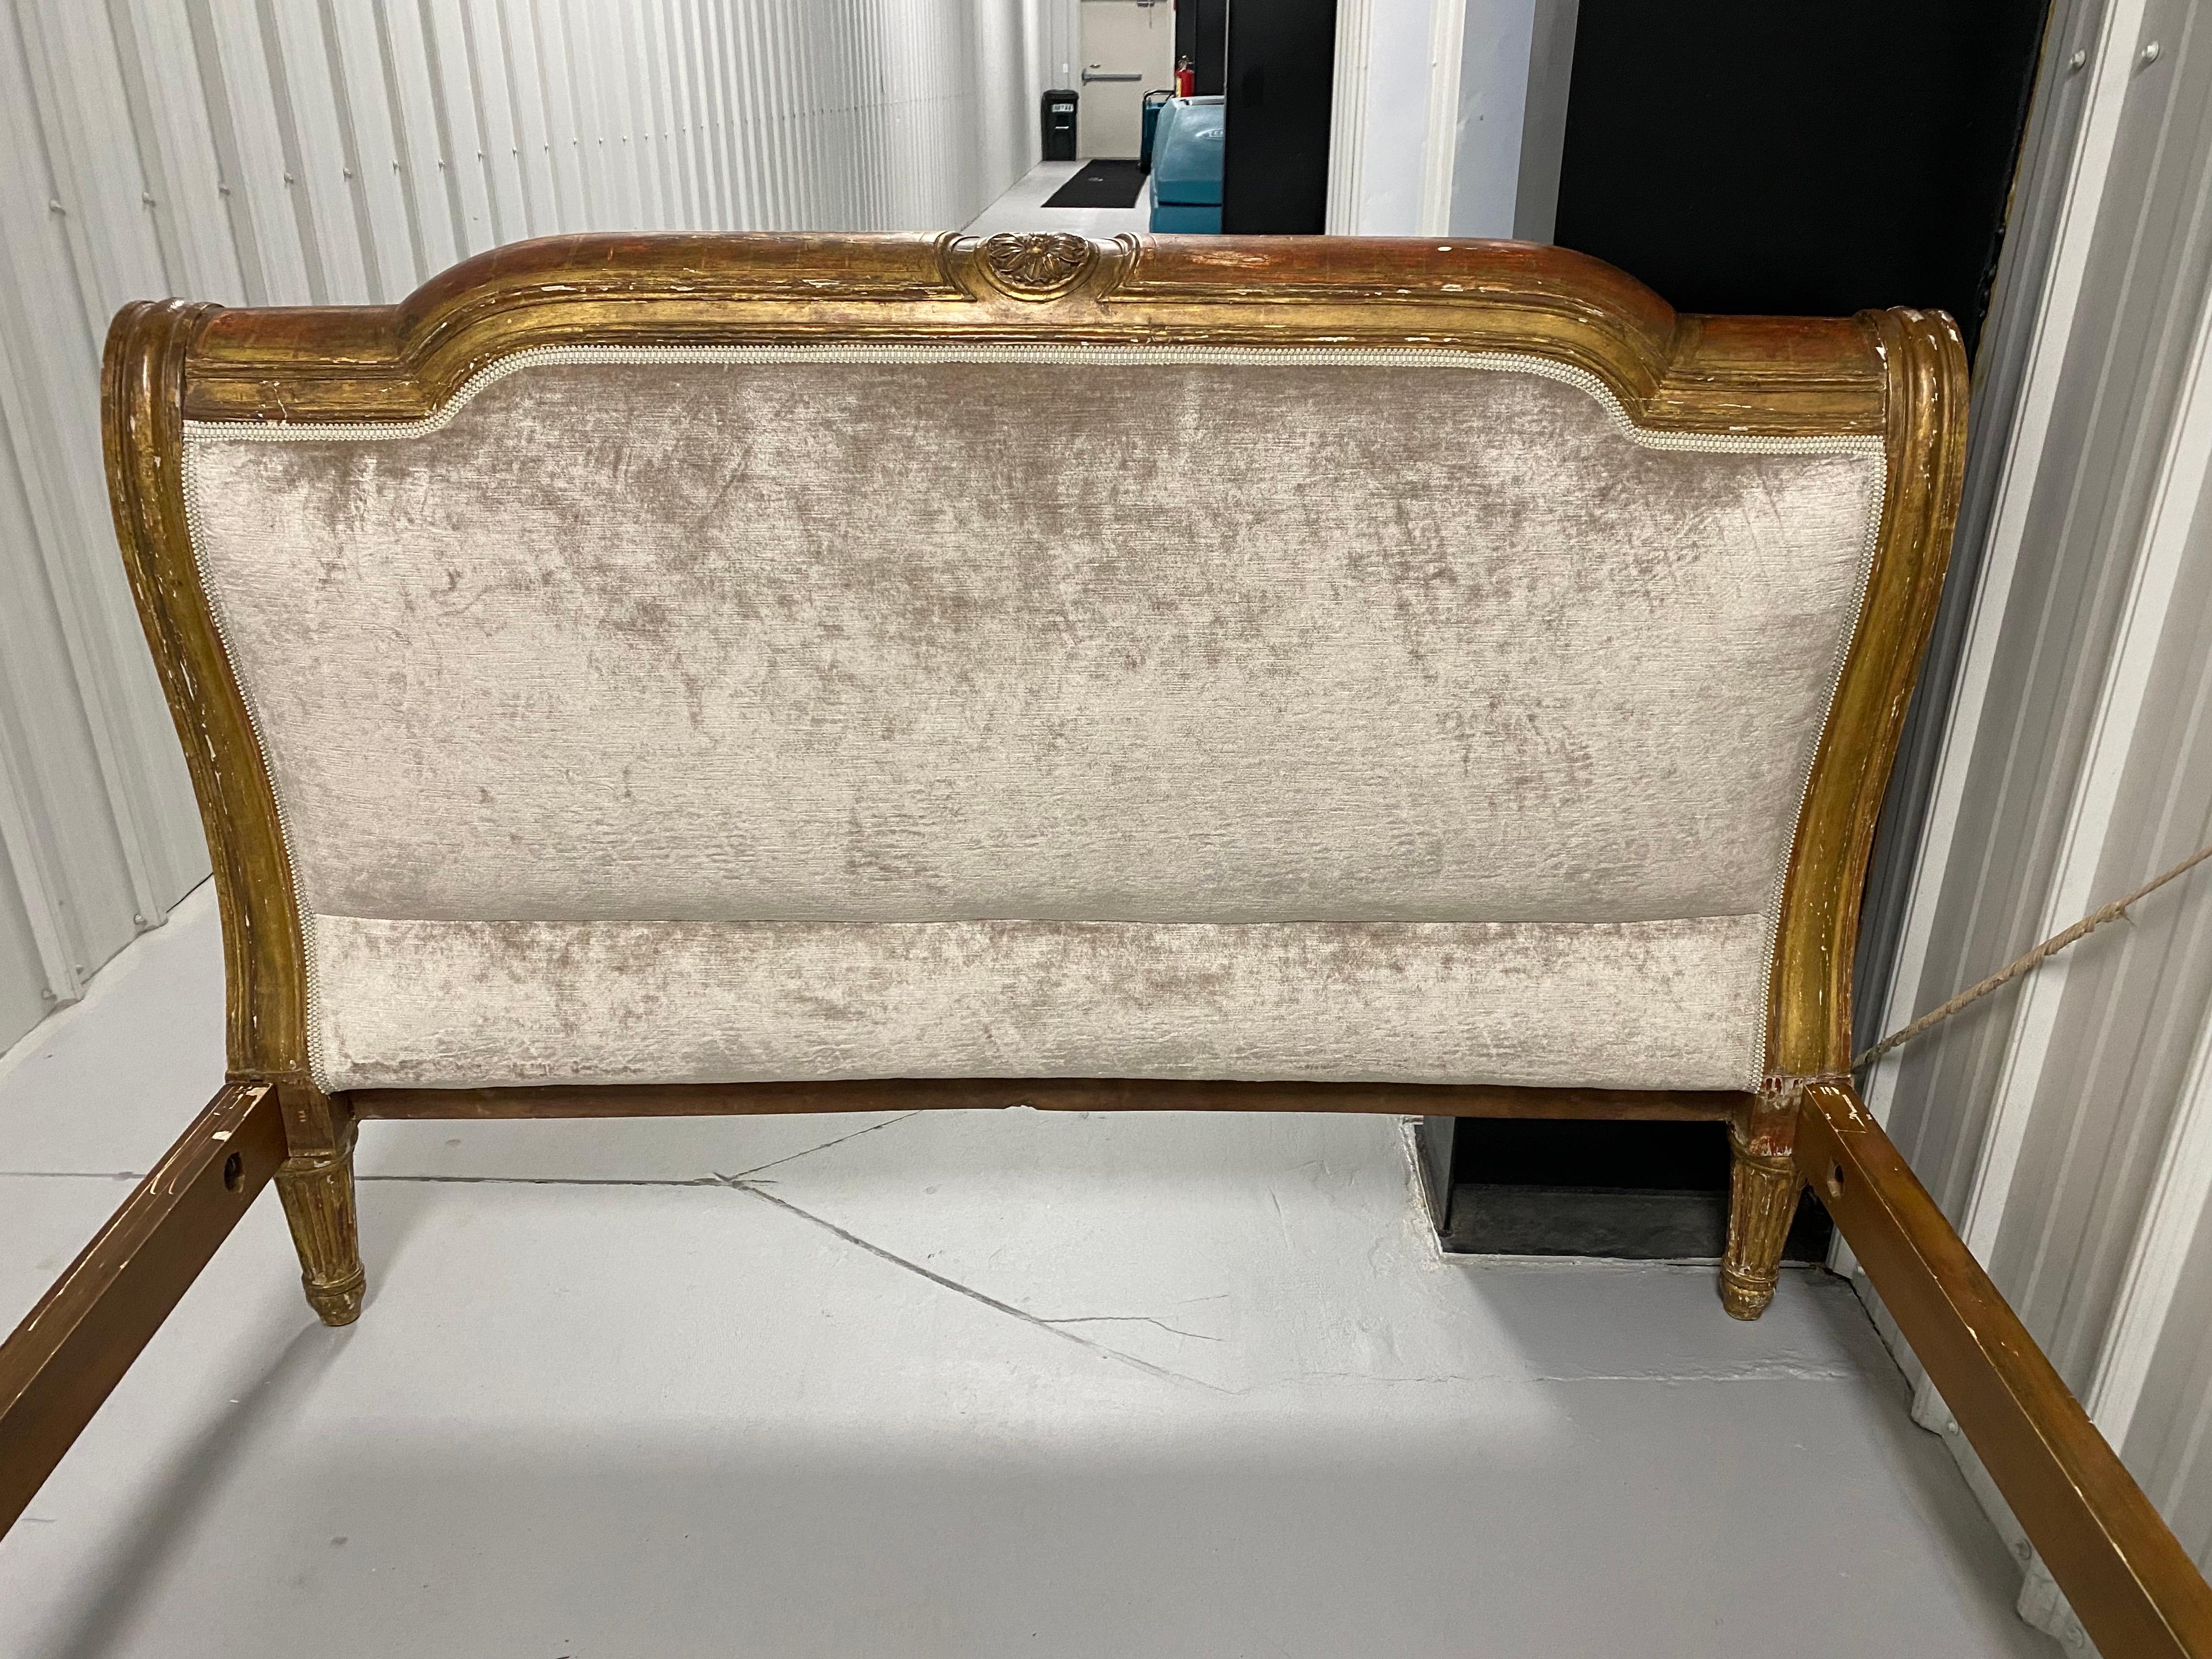 A 19th Century French Gilt-wood Queen Size Headboard and footboard together with later side rails and customized cut out platform and mattress made by Charles H Beckley.  In 1997, the noted Interior Designer, David Easton, sourced the antique head